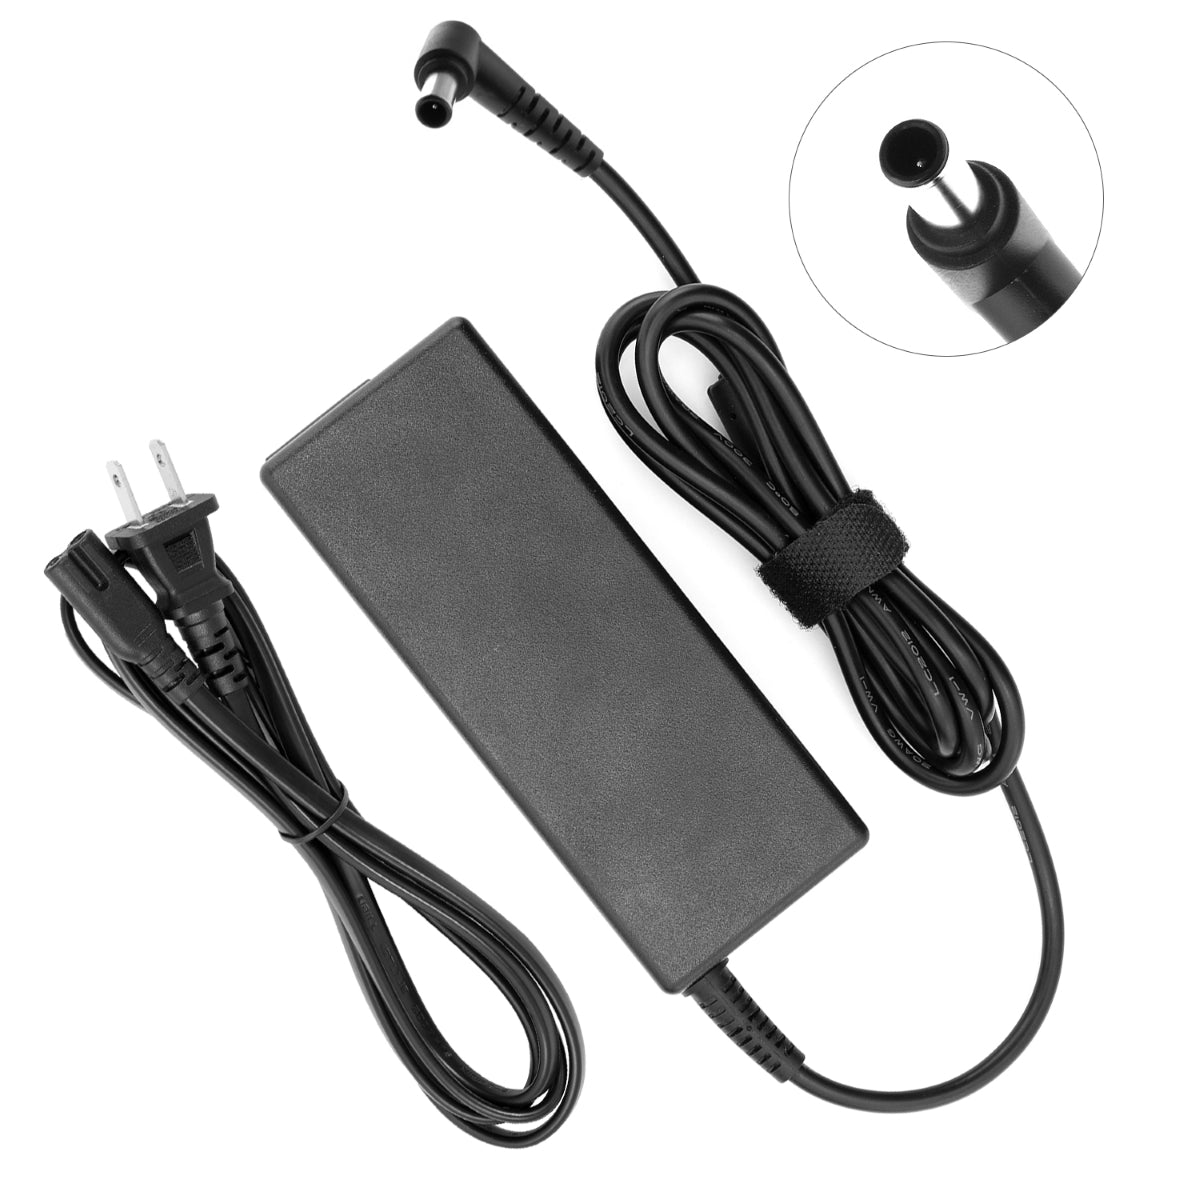 AC Adapter Power Supply for Samsung 27-inch C27F591F LED Monitor Display